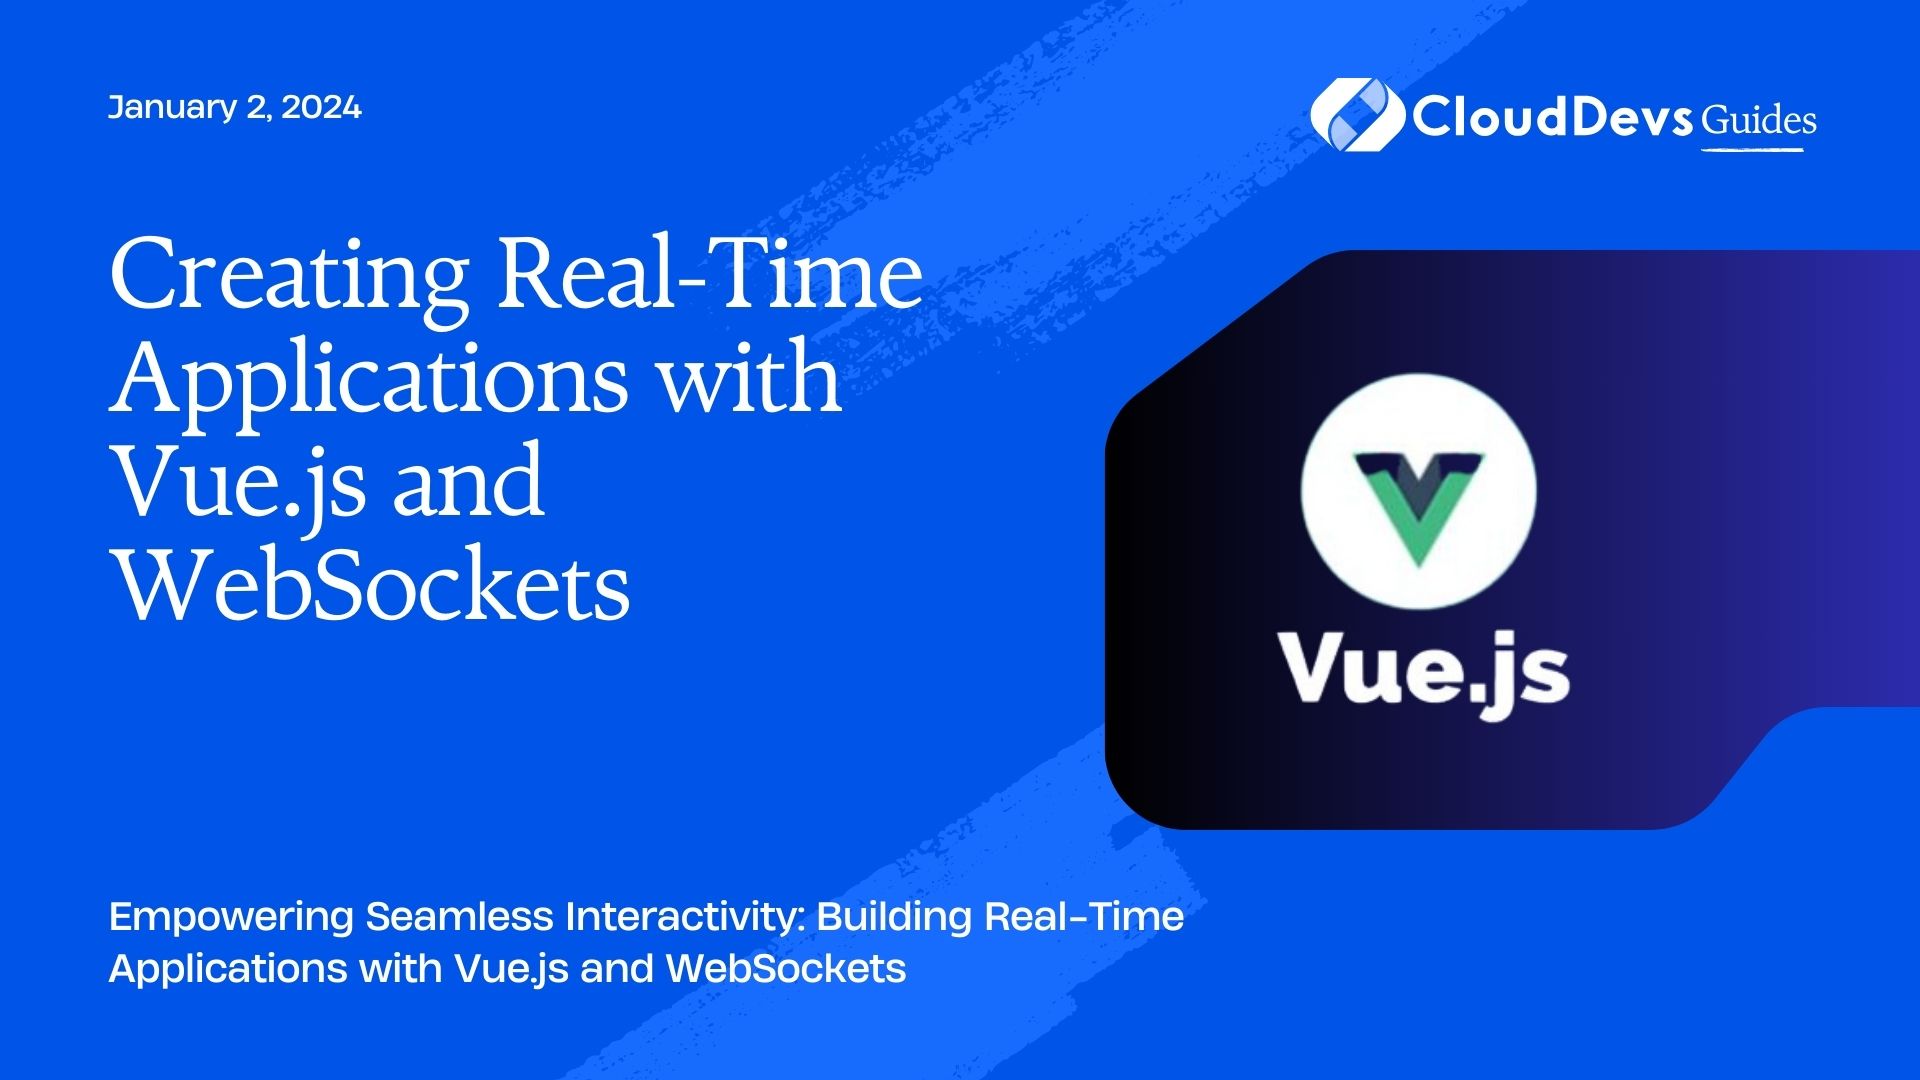 Creating Real-Time Applications with Vue.js and WebSockets